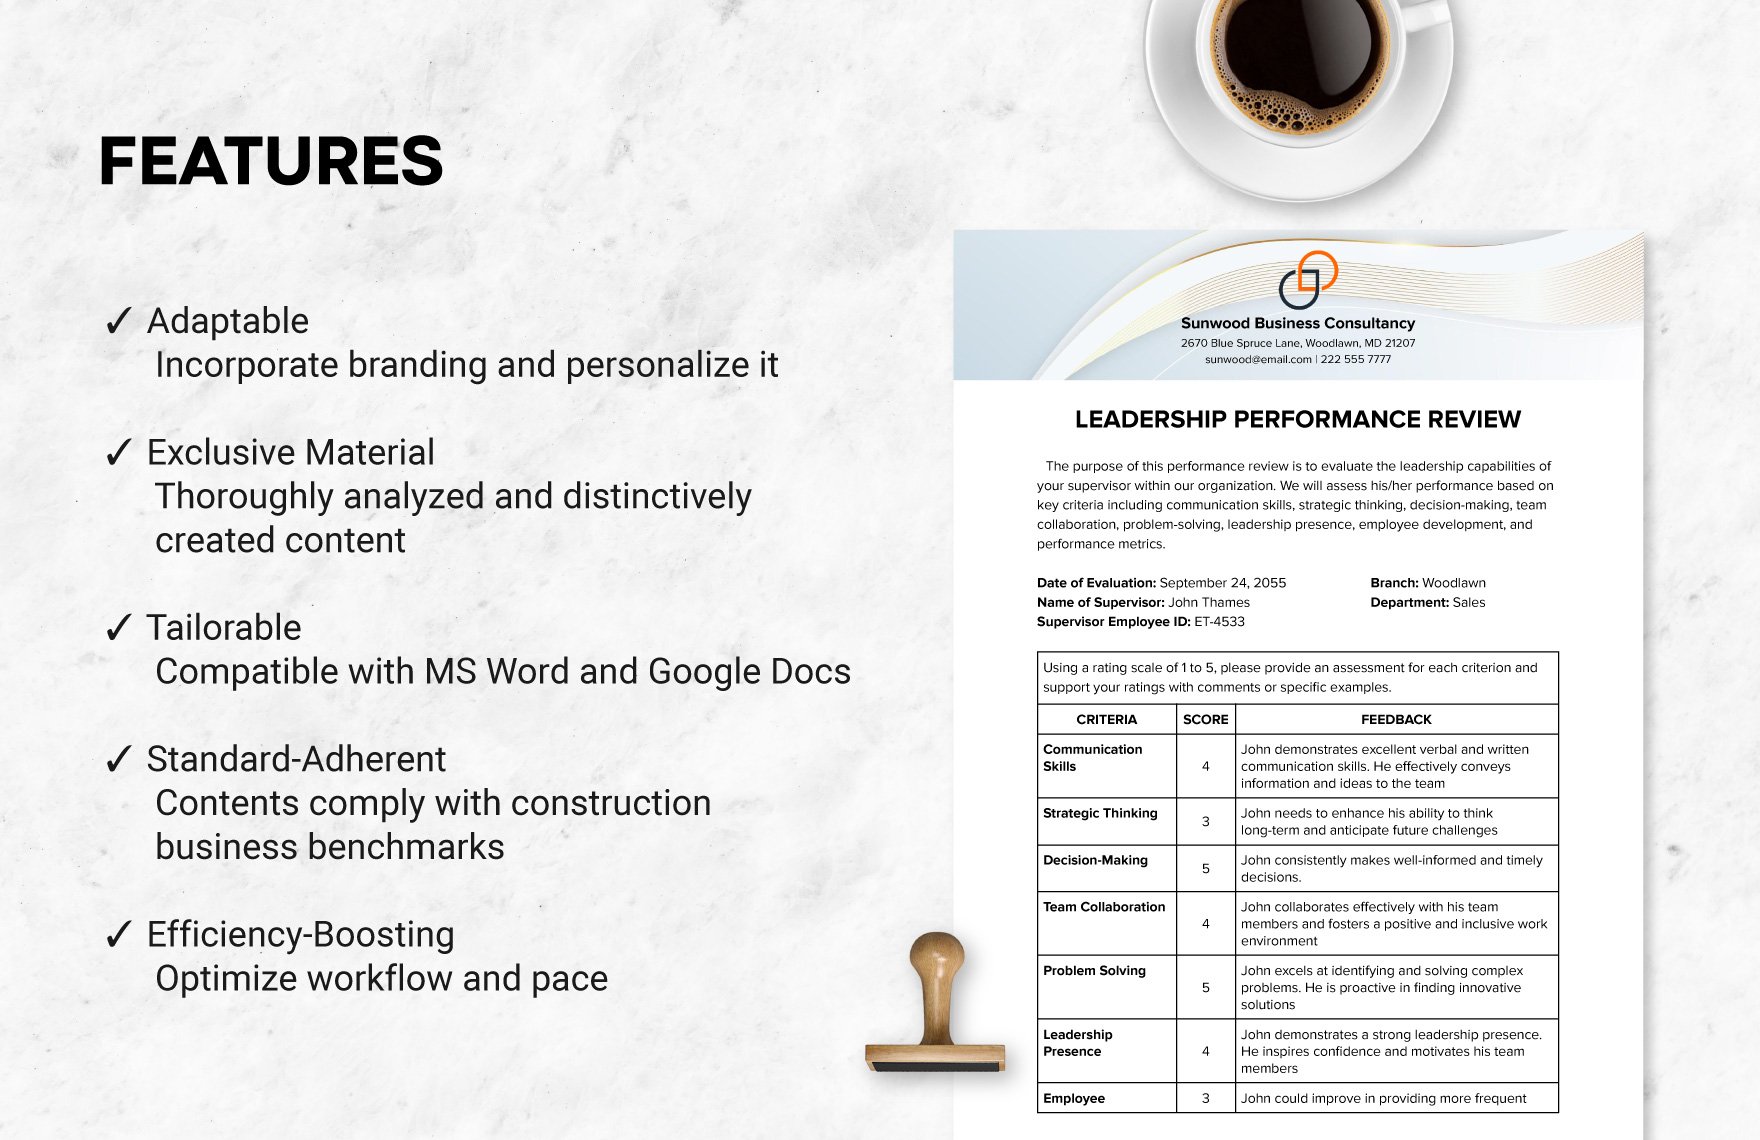 Leadership Performance Review Example  Template